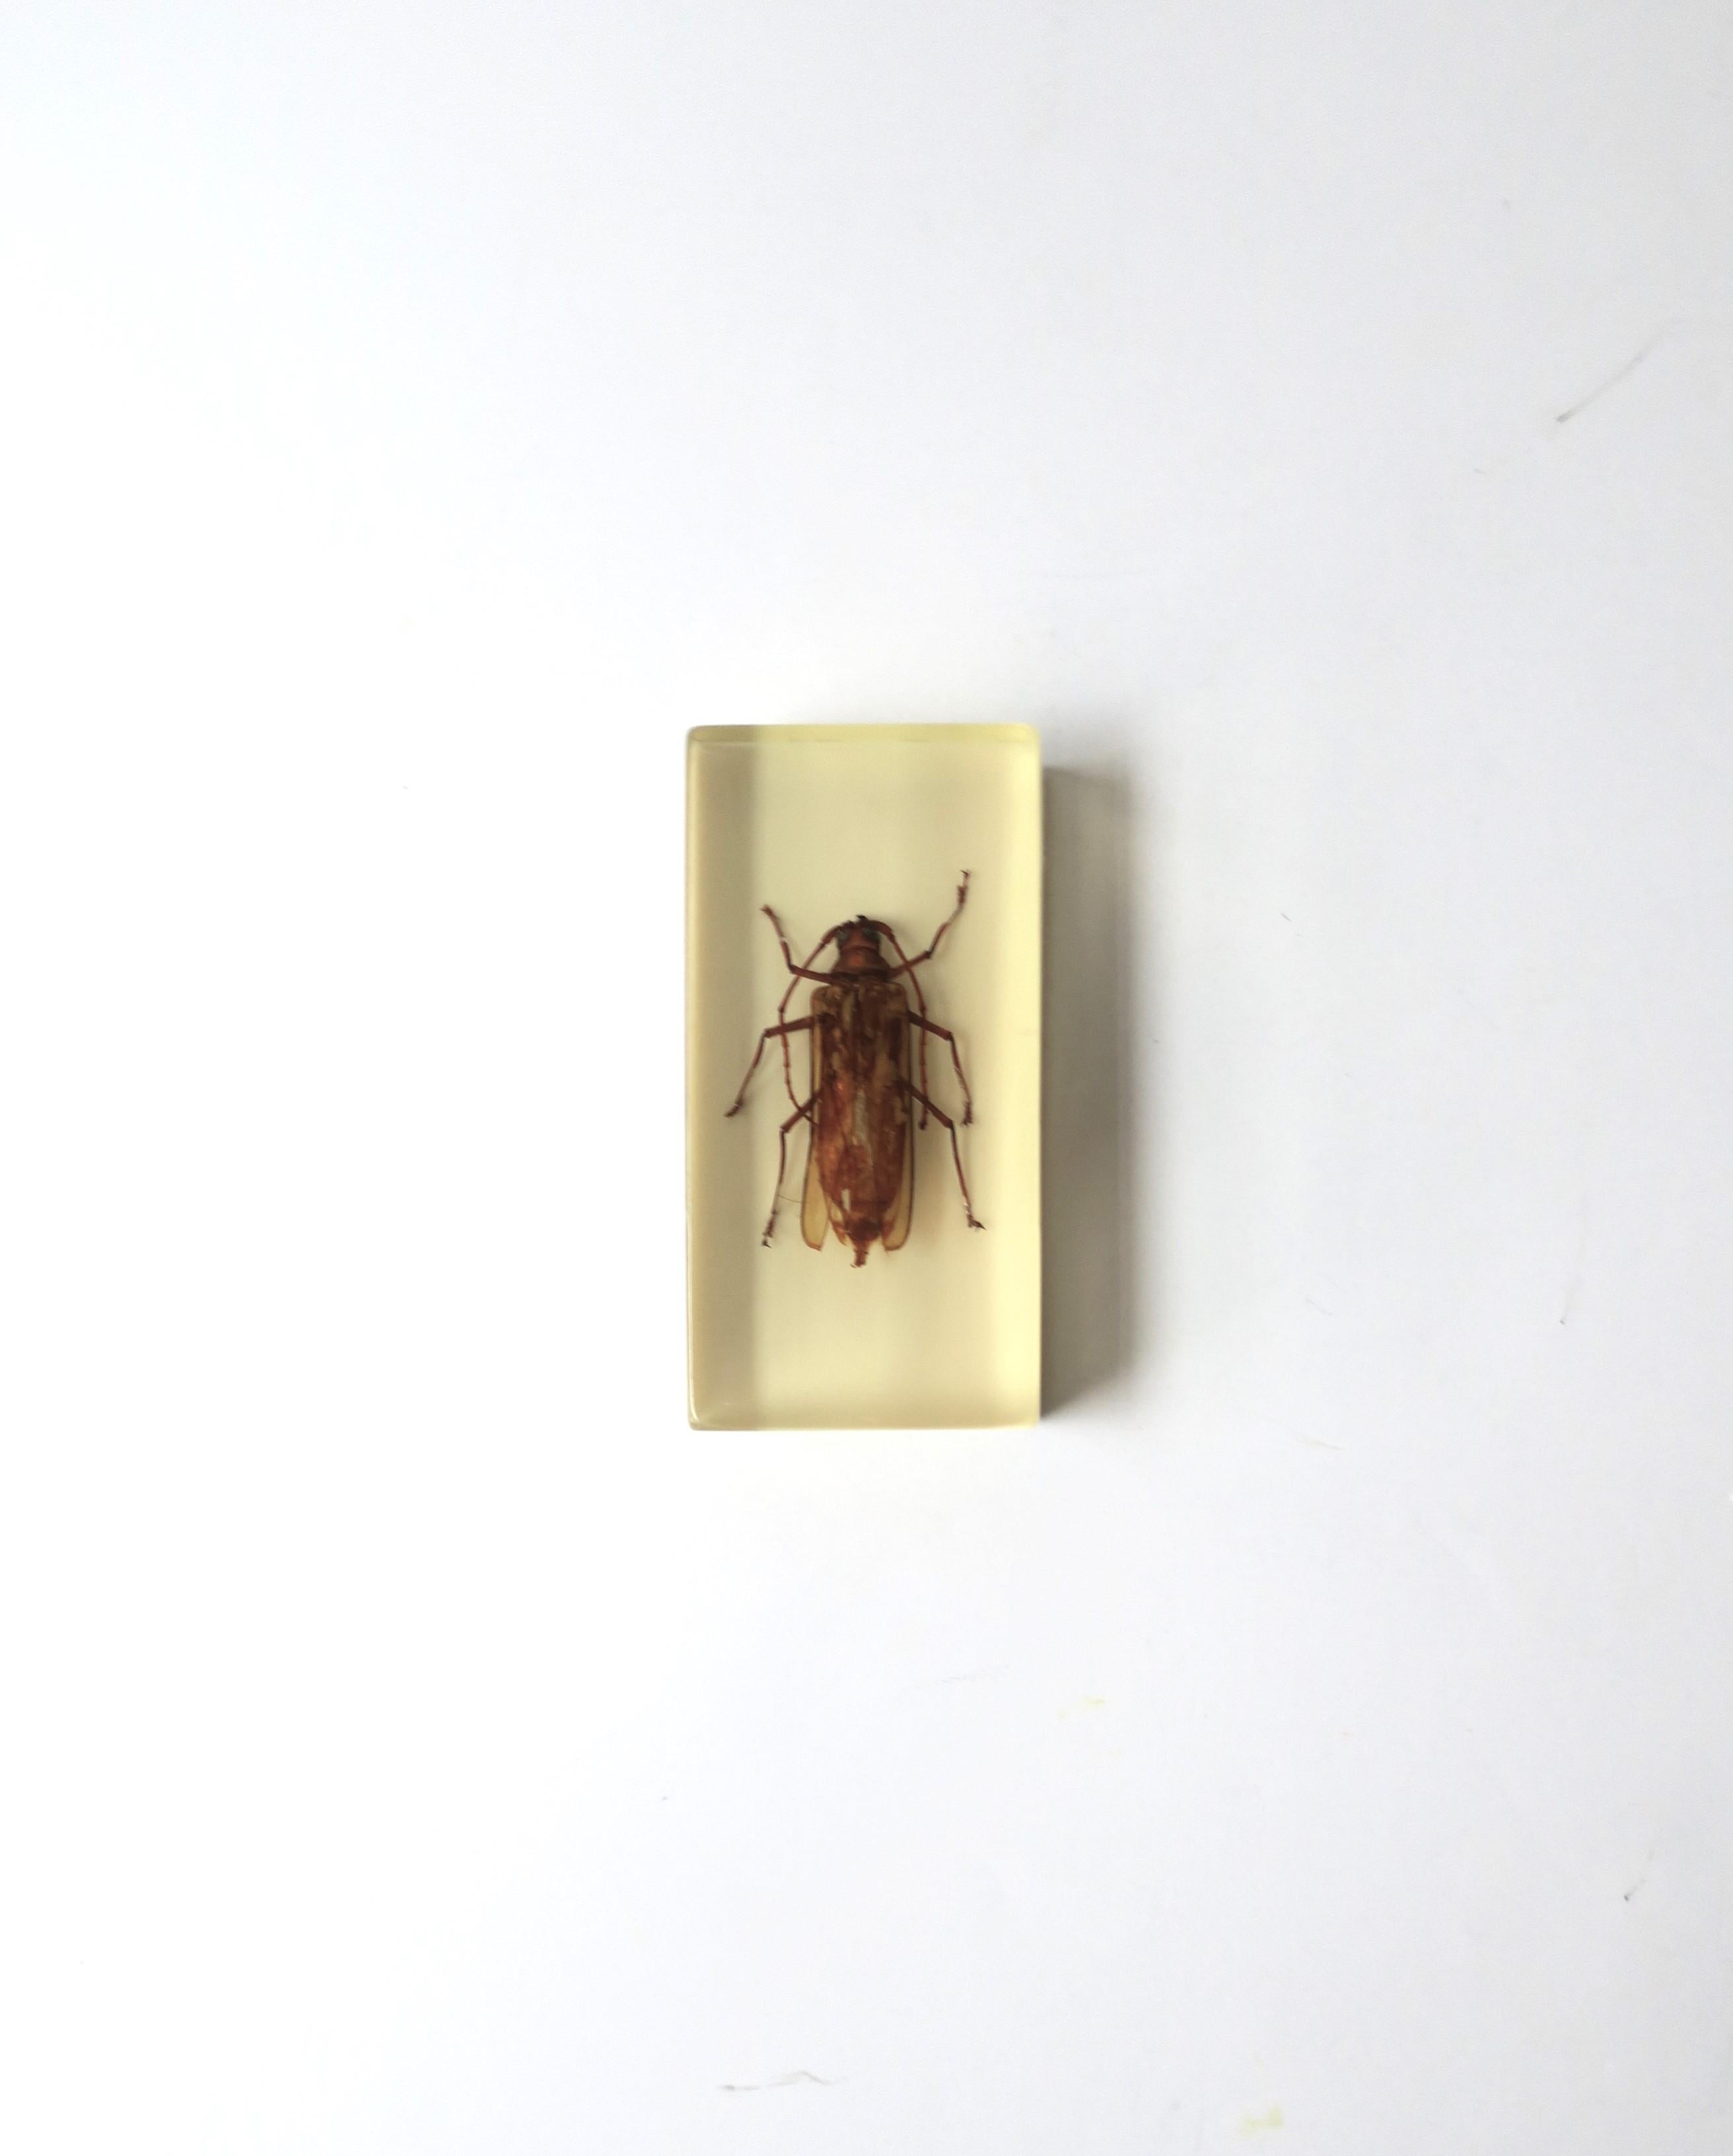 A vintage Lucite encased insect bug decorative object or paperweight, circa mid-20th century. A great piece for a desk, library, shelf, etc. Dimensions: 2.07